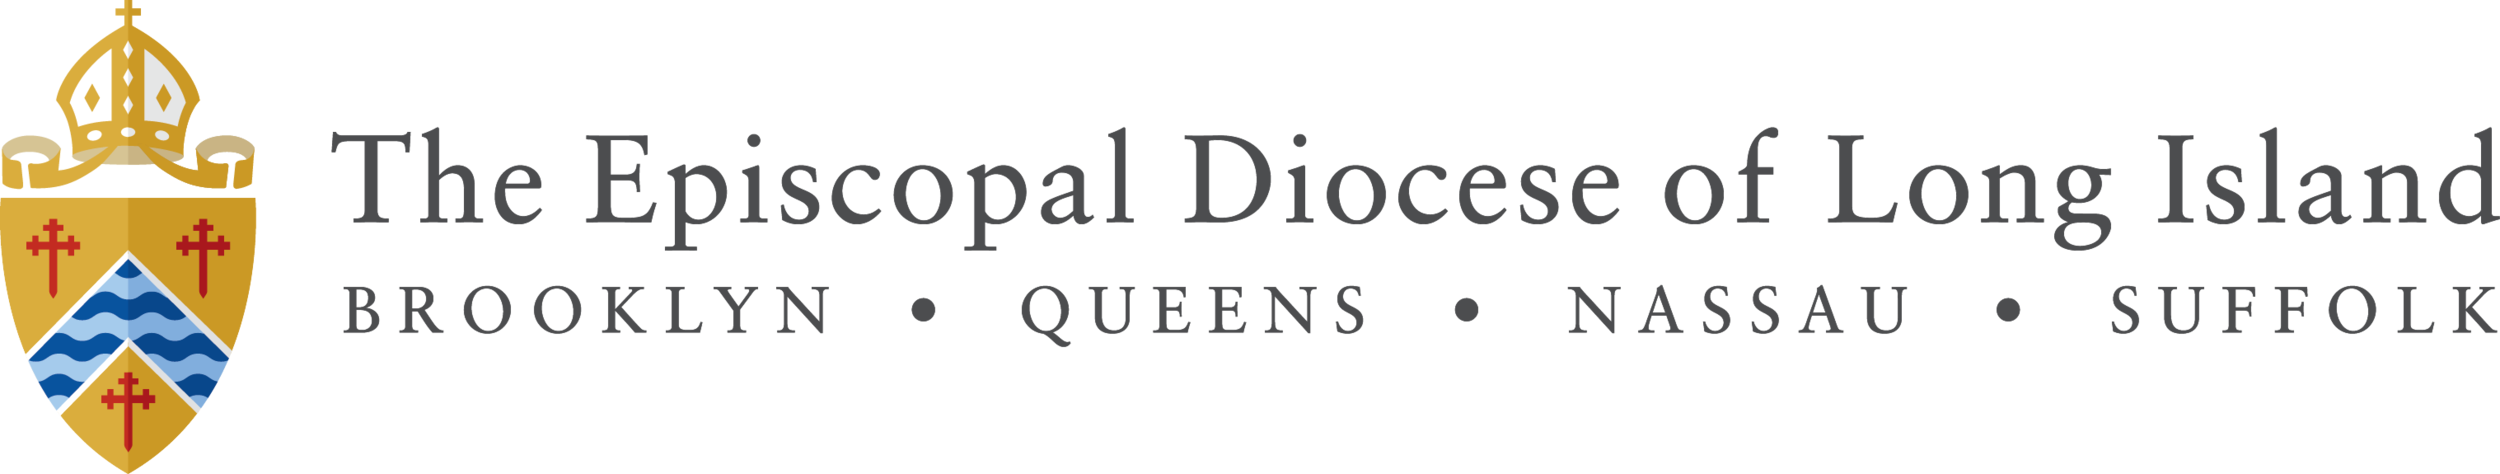 Diocese Logo-Horizontal-Full Color-With Tagline.png